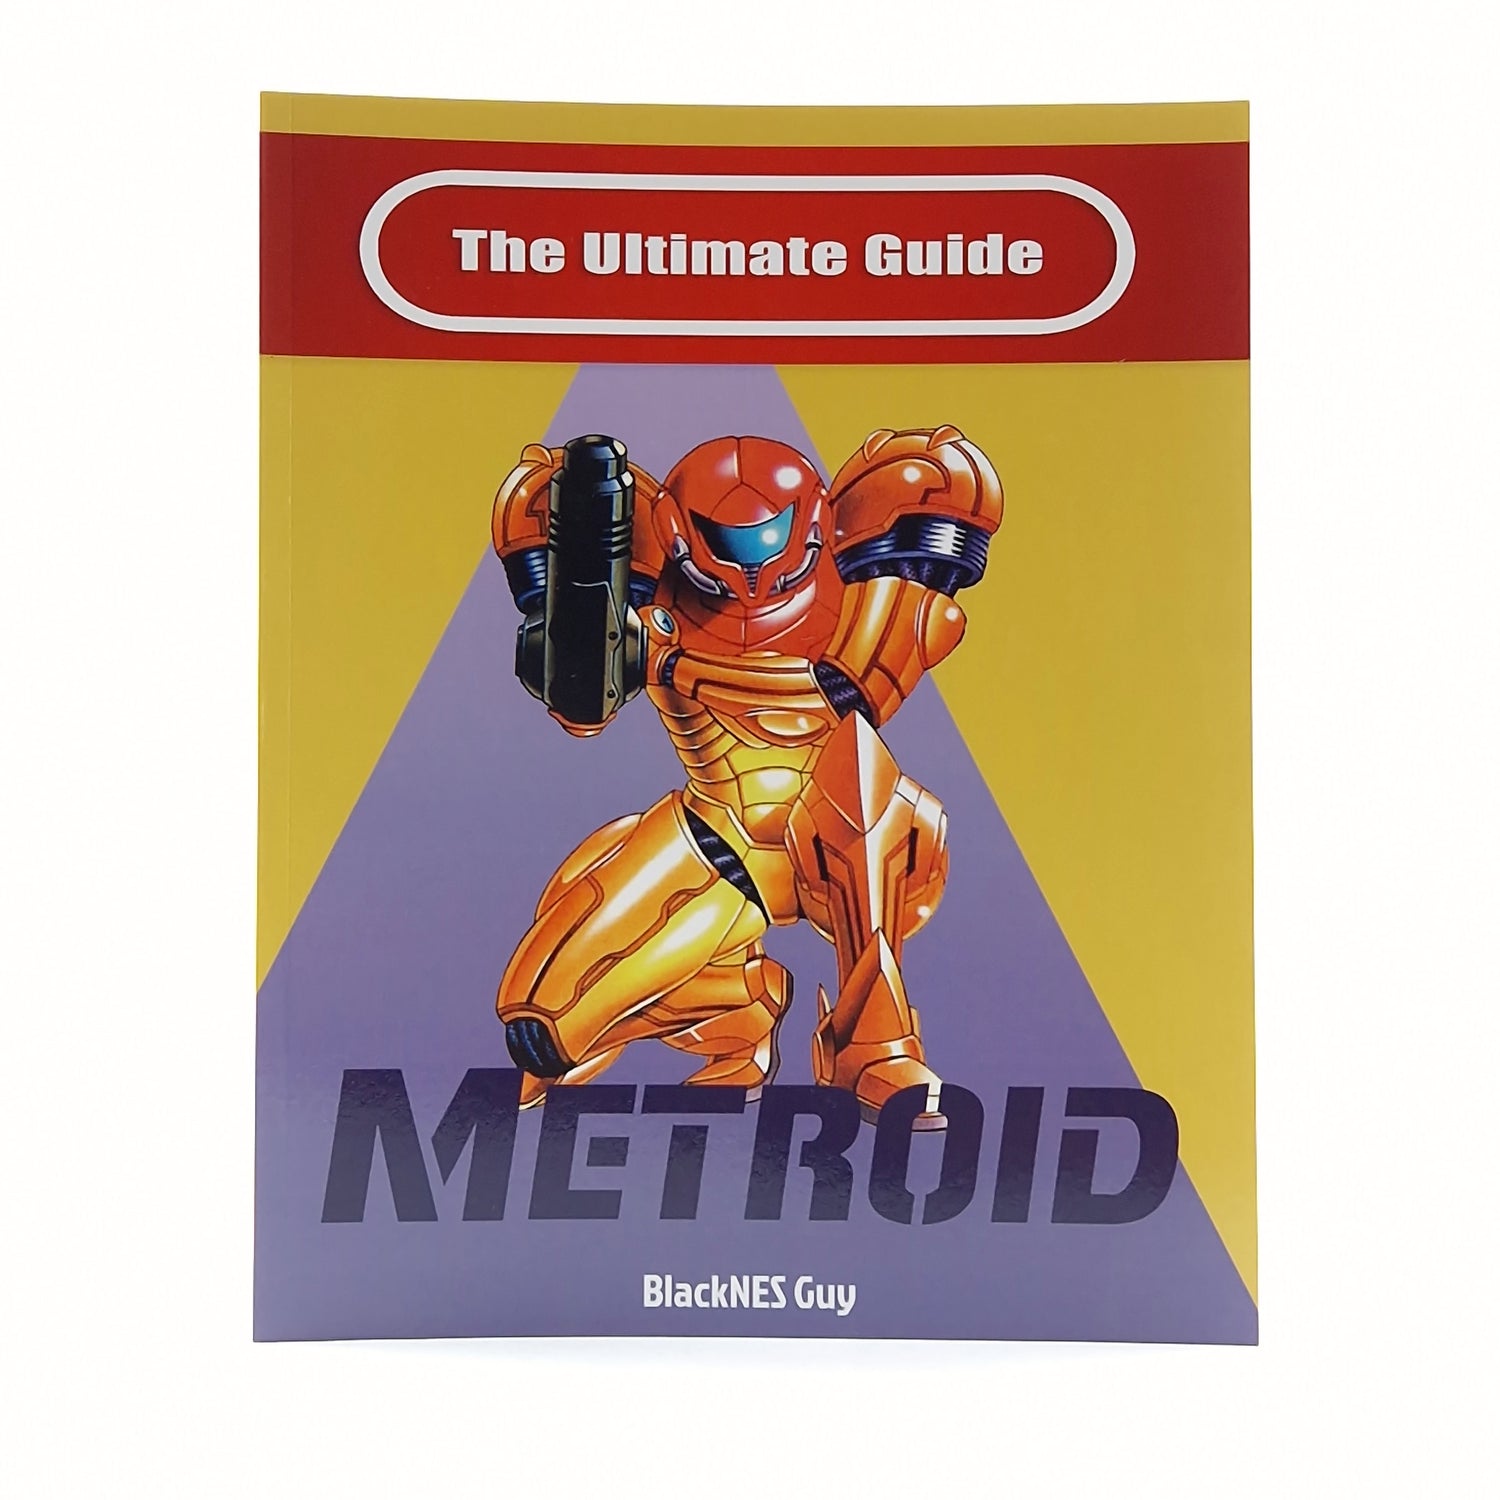 The Ultimate Guide : Metroid by BlackNES Guy - Lösungsbuch - Berater